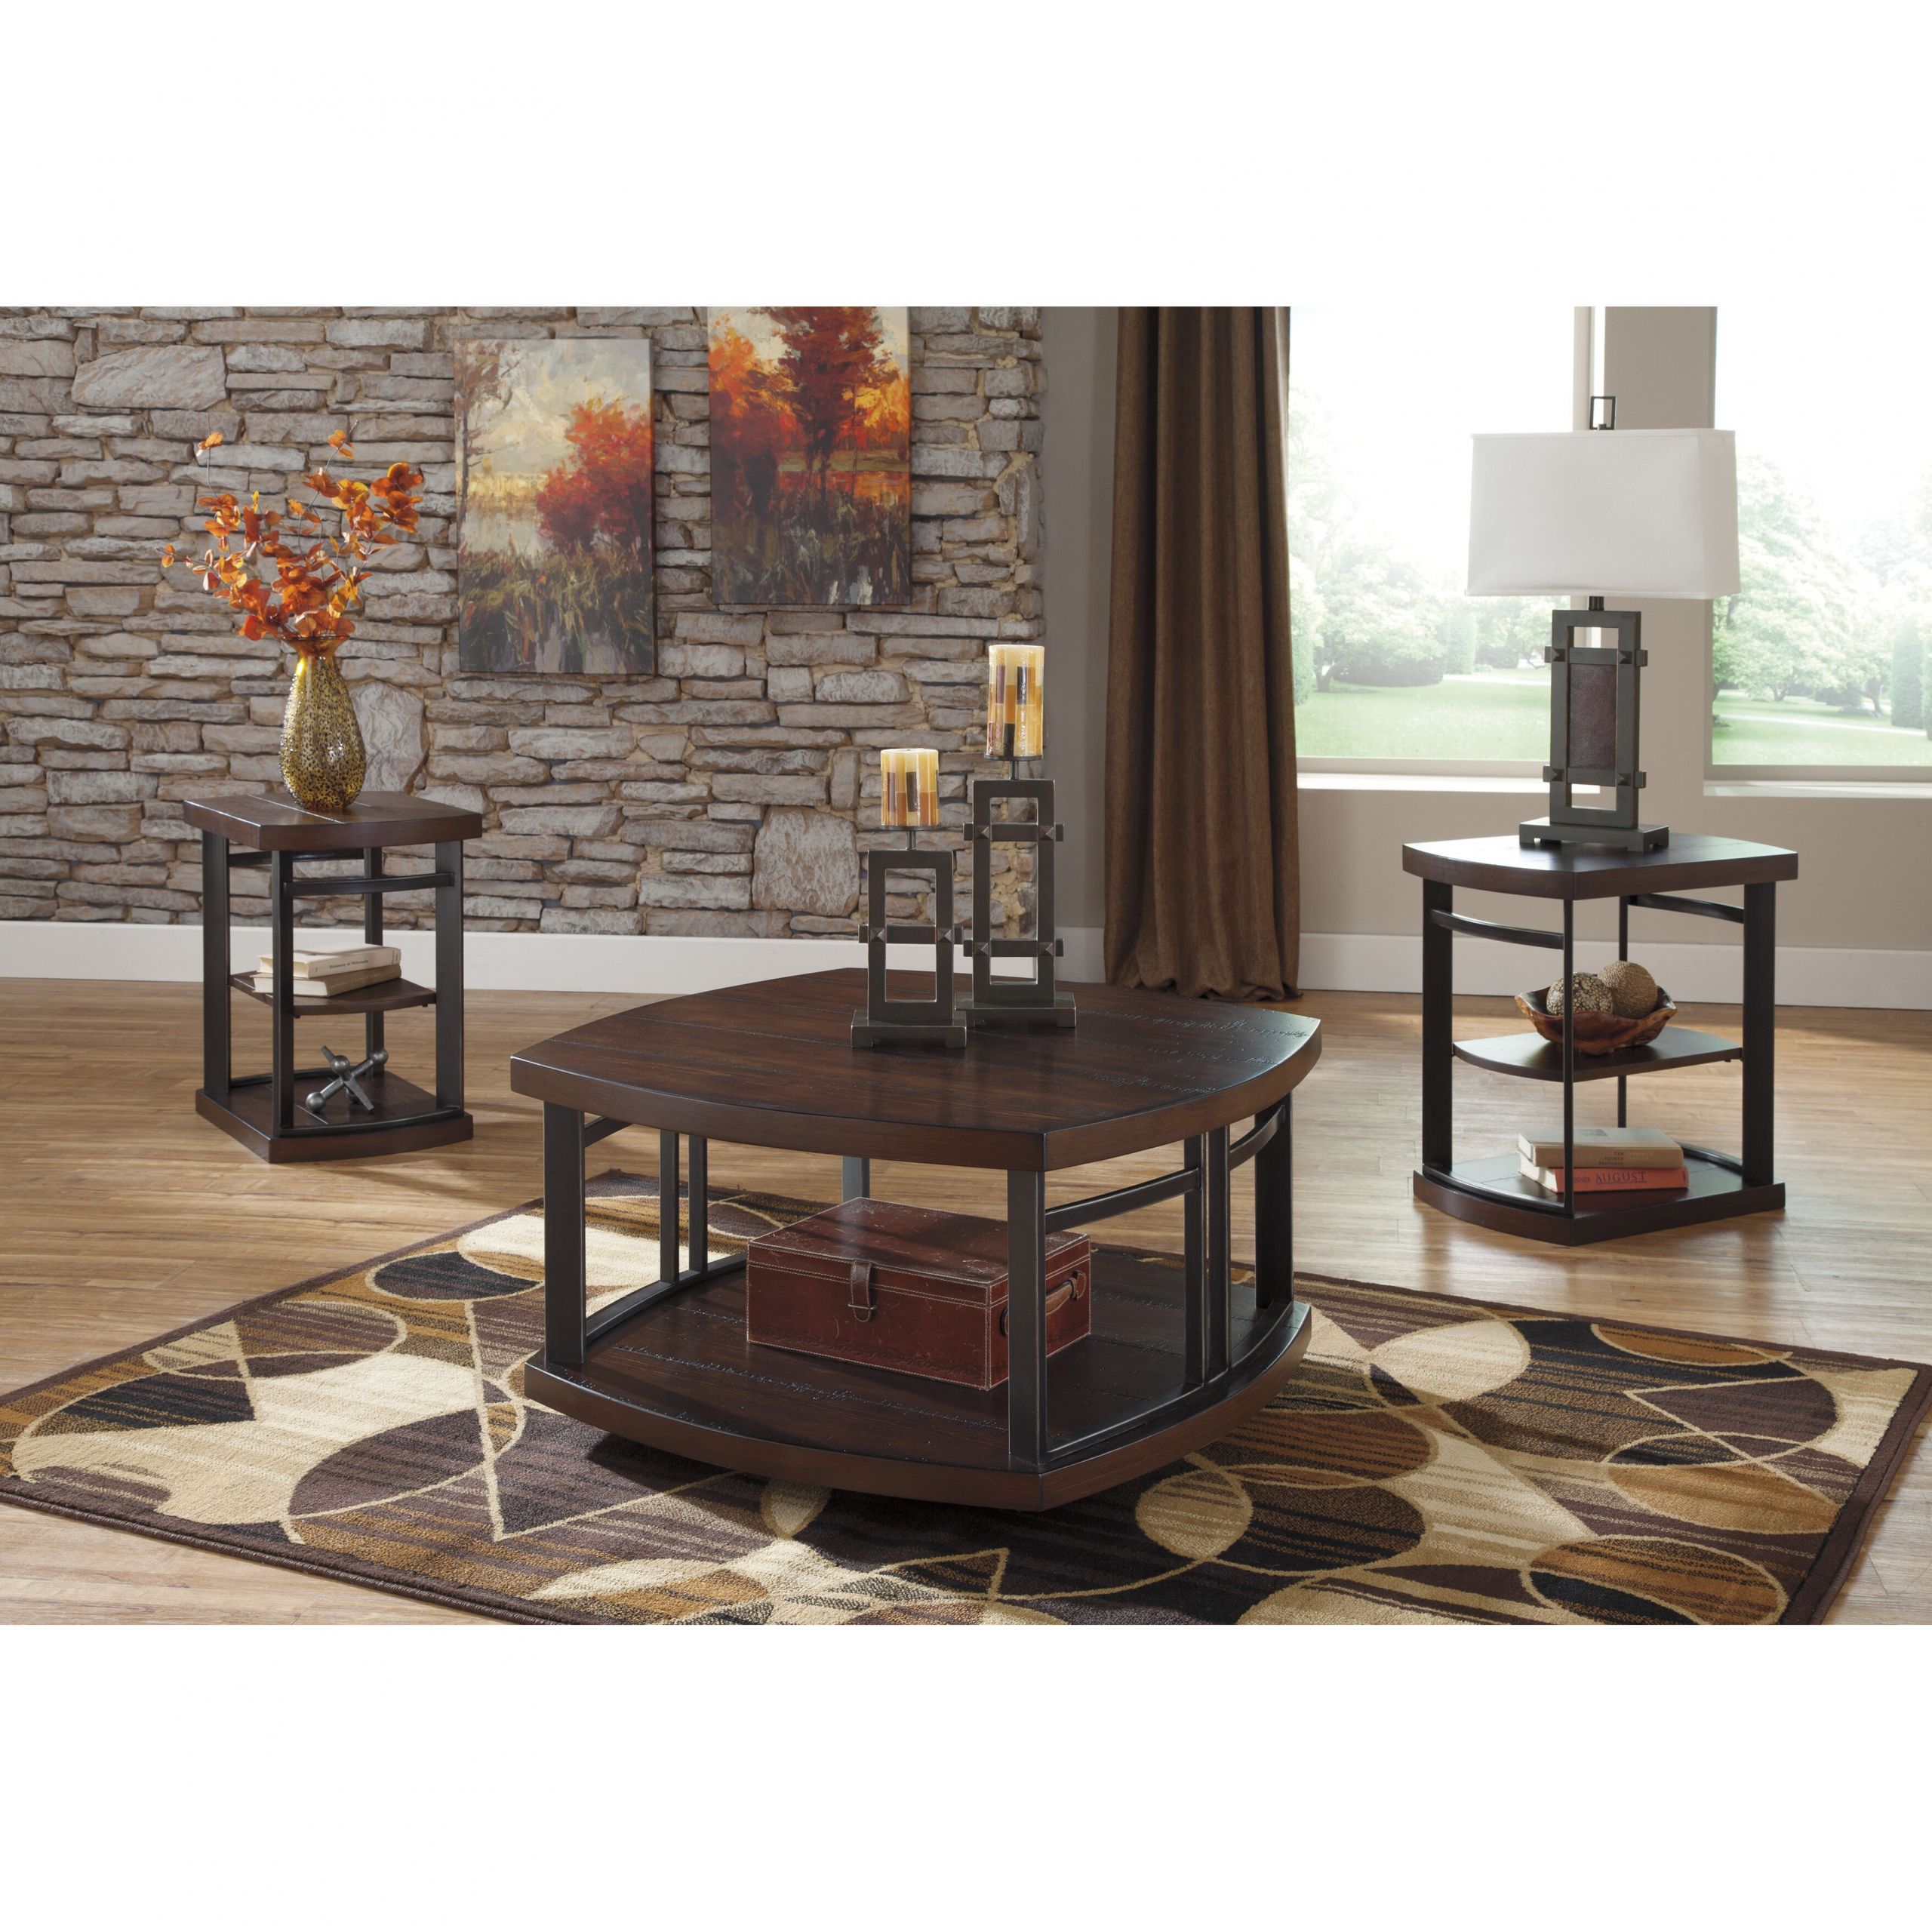 Living Room End Table Sets
 Brayden Studio Dube 3 Piece Coffee Table Set & Reviews